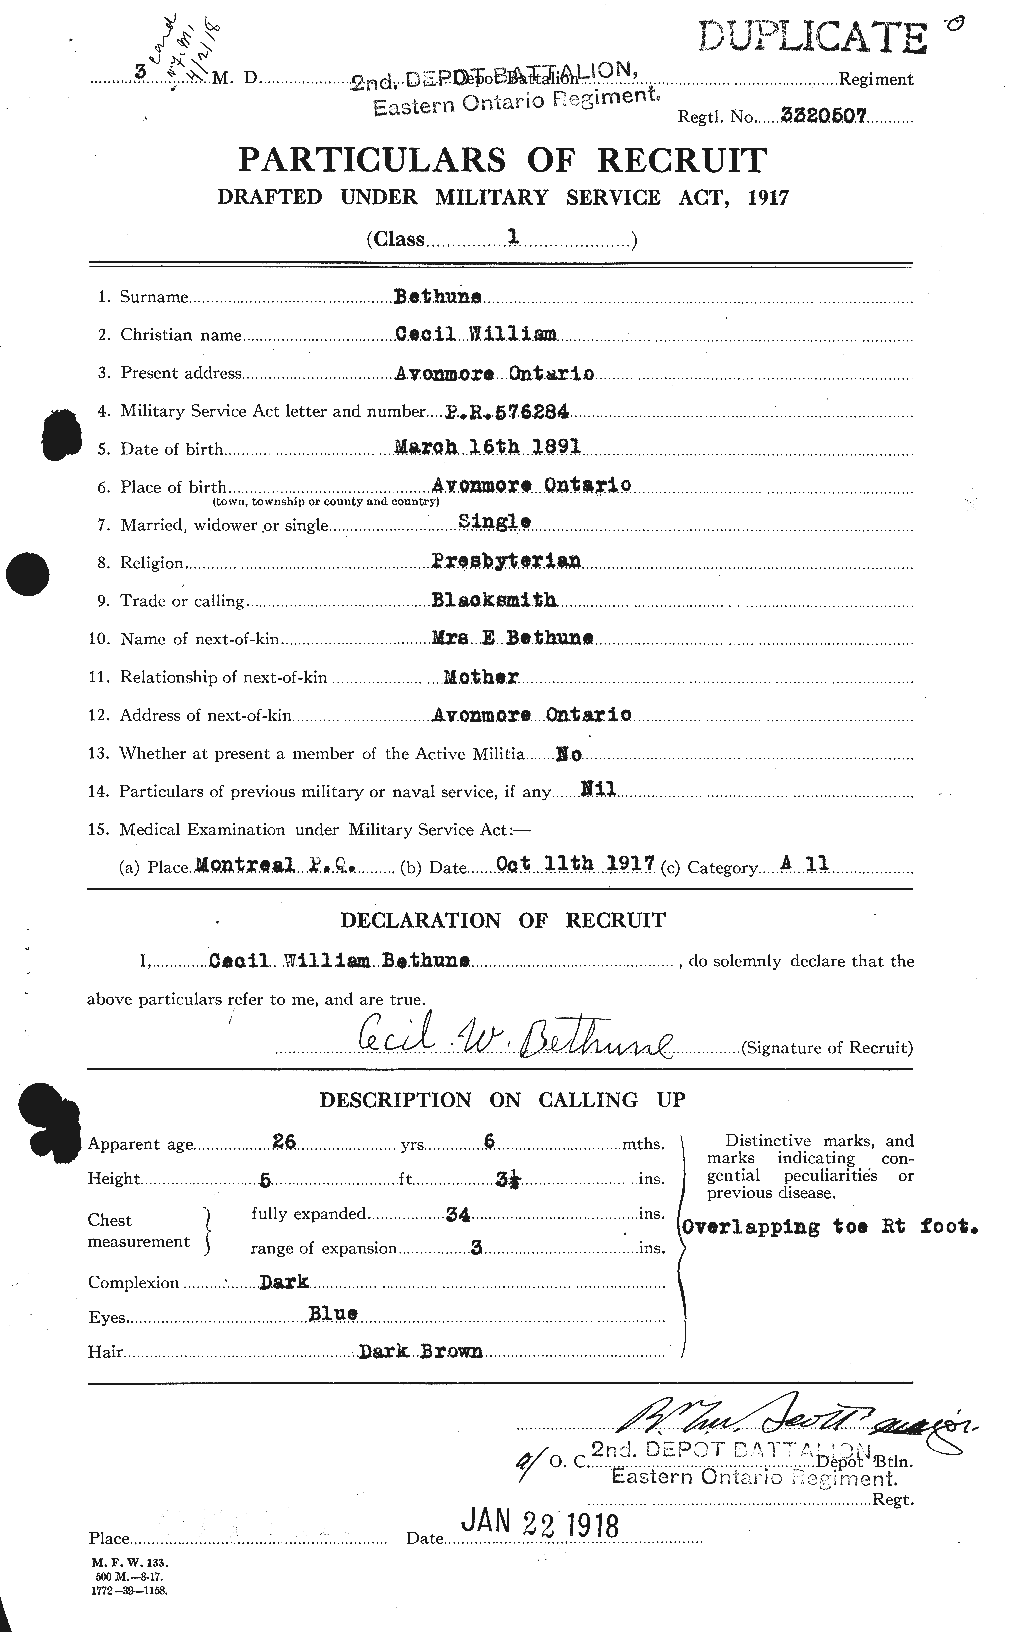 Personnel Records of the First World War - CEF 237001a